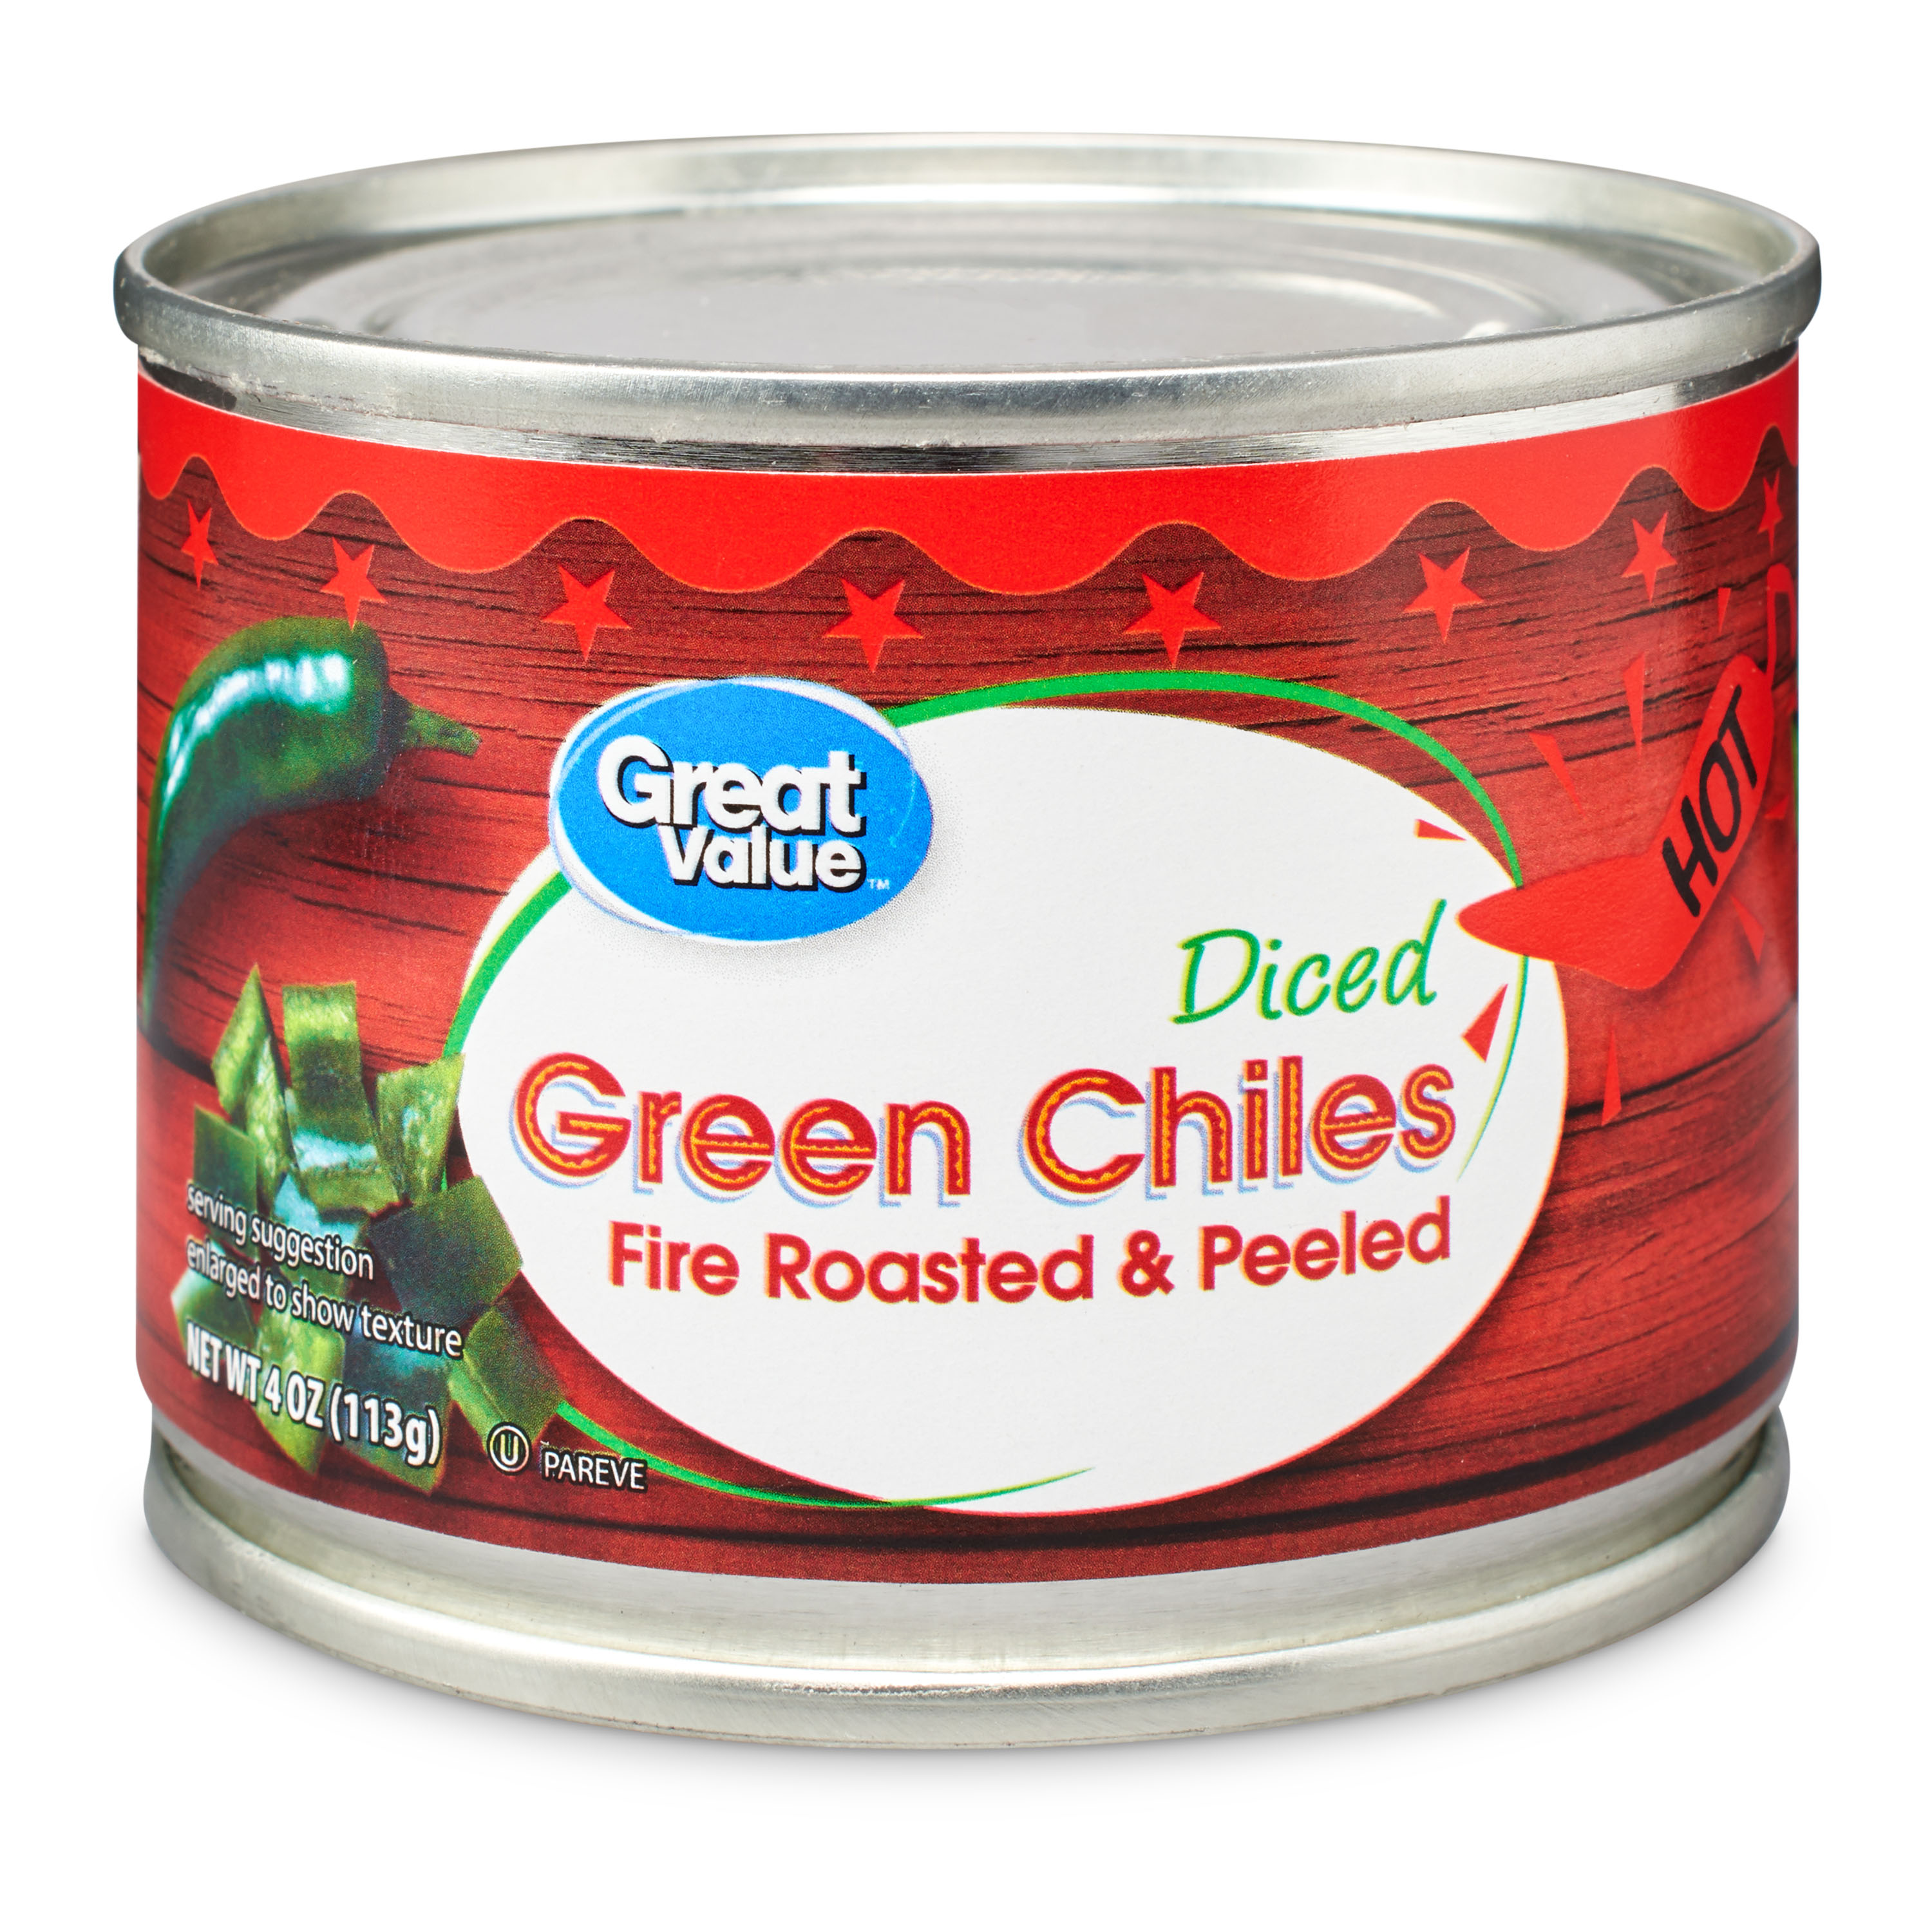 Great Value Hot Diced Green Chiles, 4 Oz Image